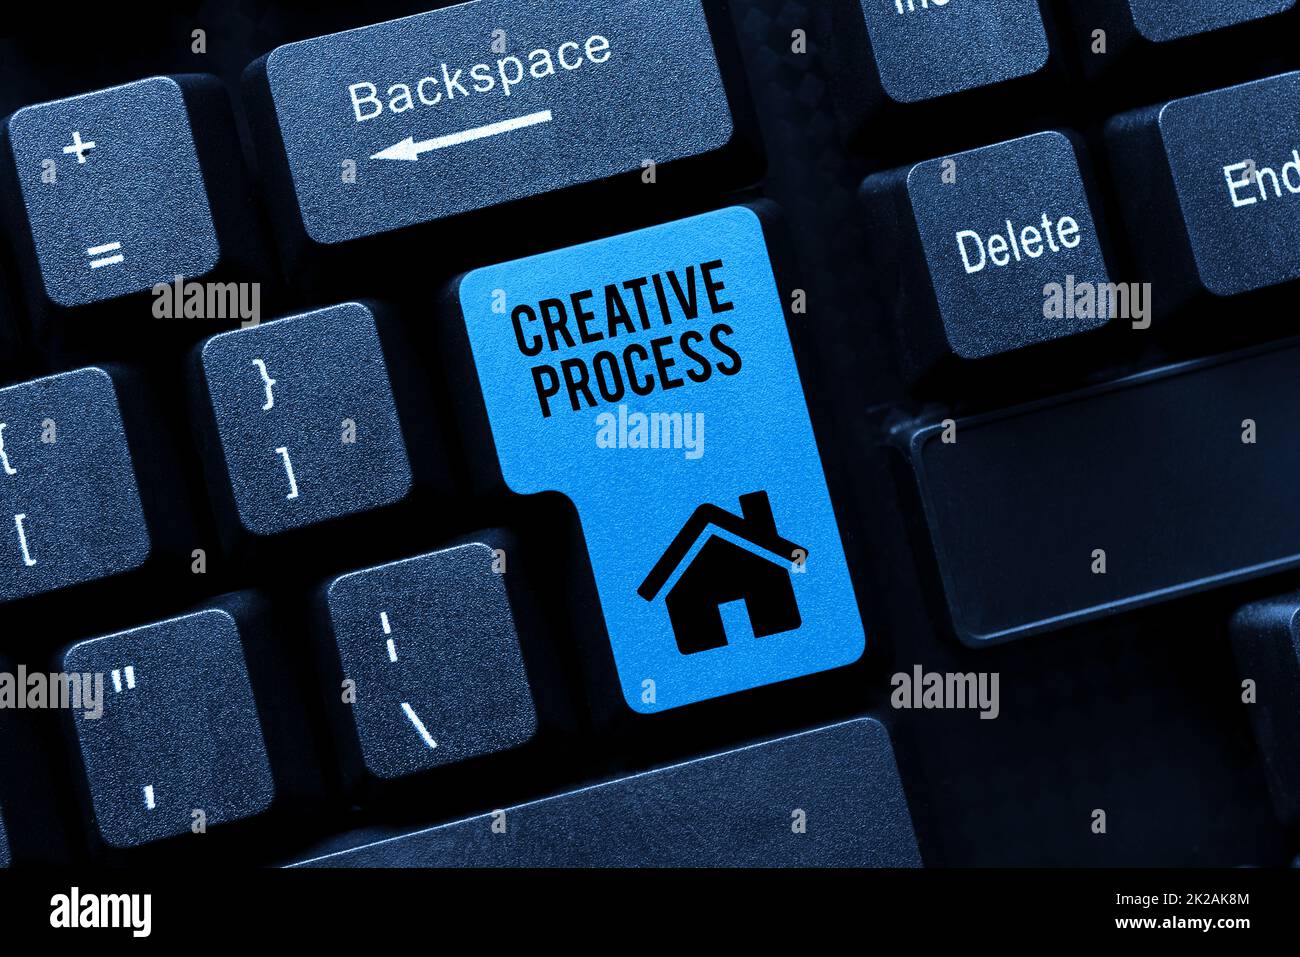 Conceptual caption Creative Process. Concept meaning connecting ideas into something valuable creativity Abstract Office Typing Jobs, Typewriting Important Work Reports Stock Photo